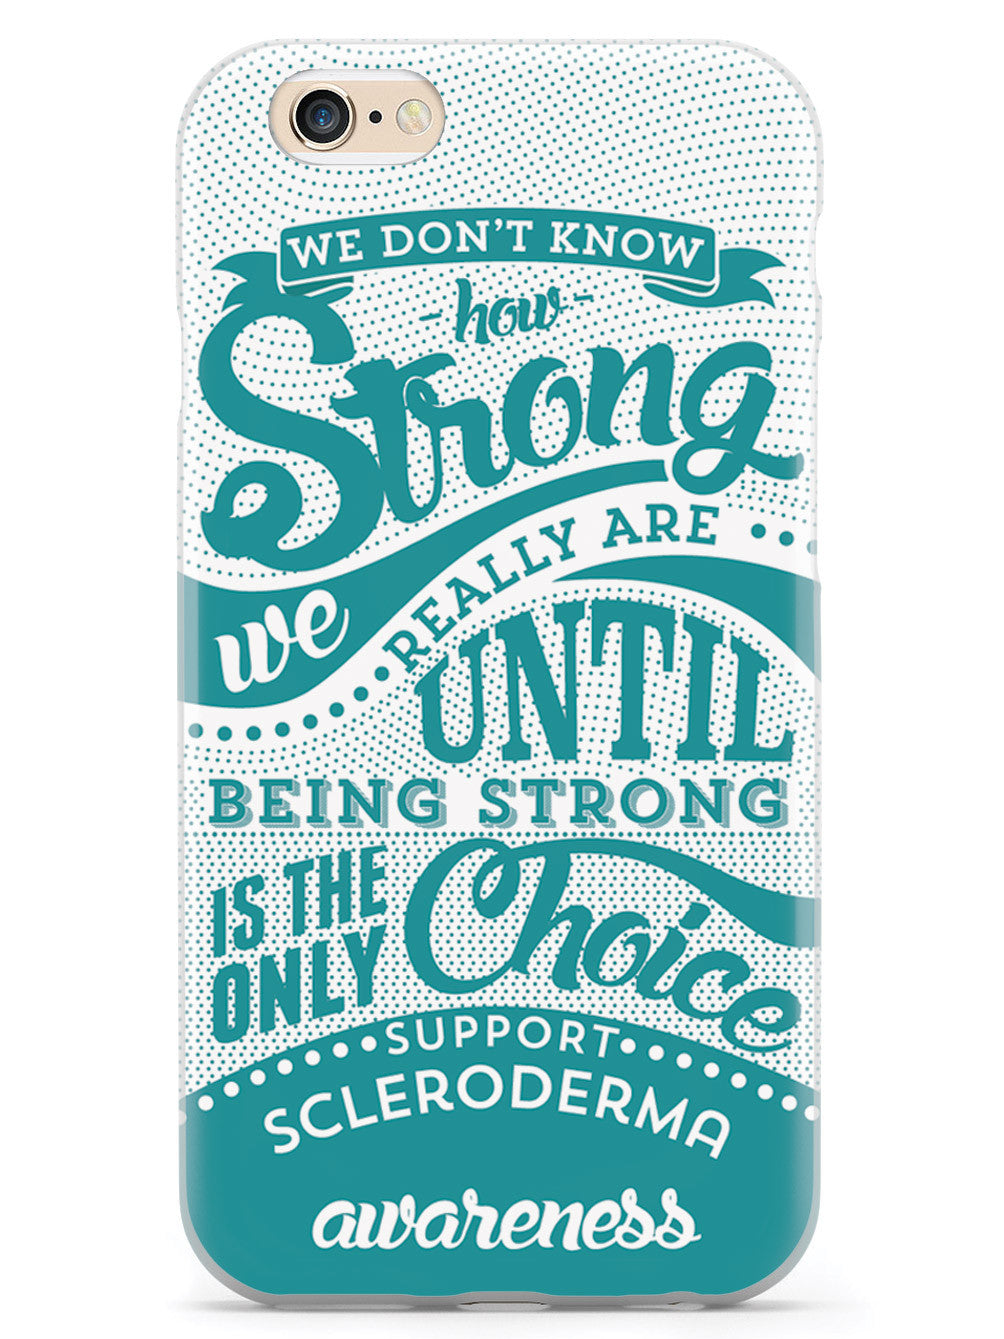 Scleroderma Awareness - How Strong Case